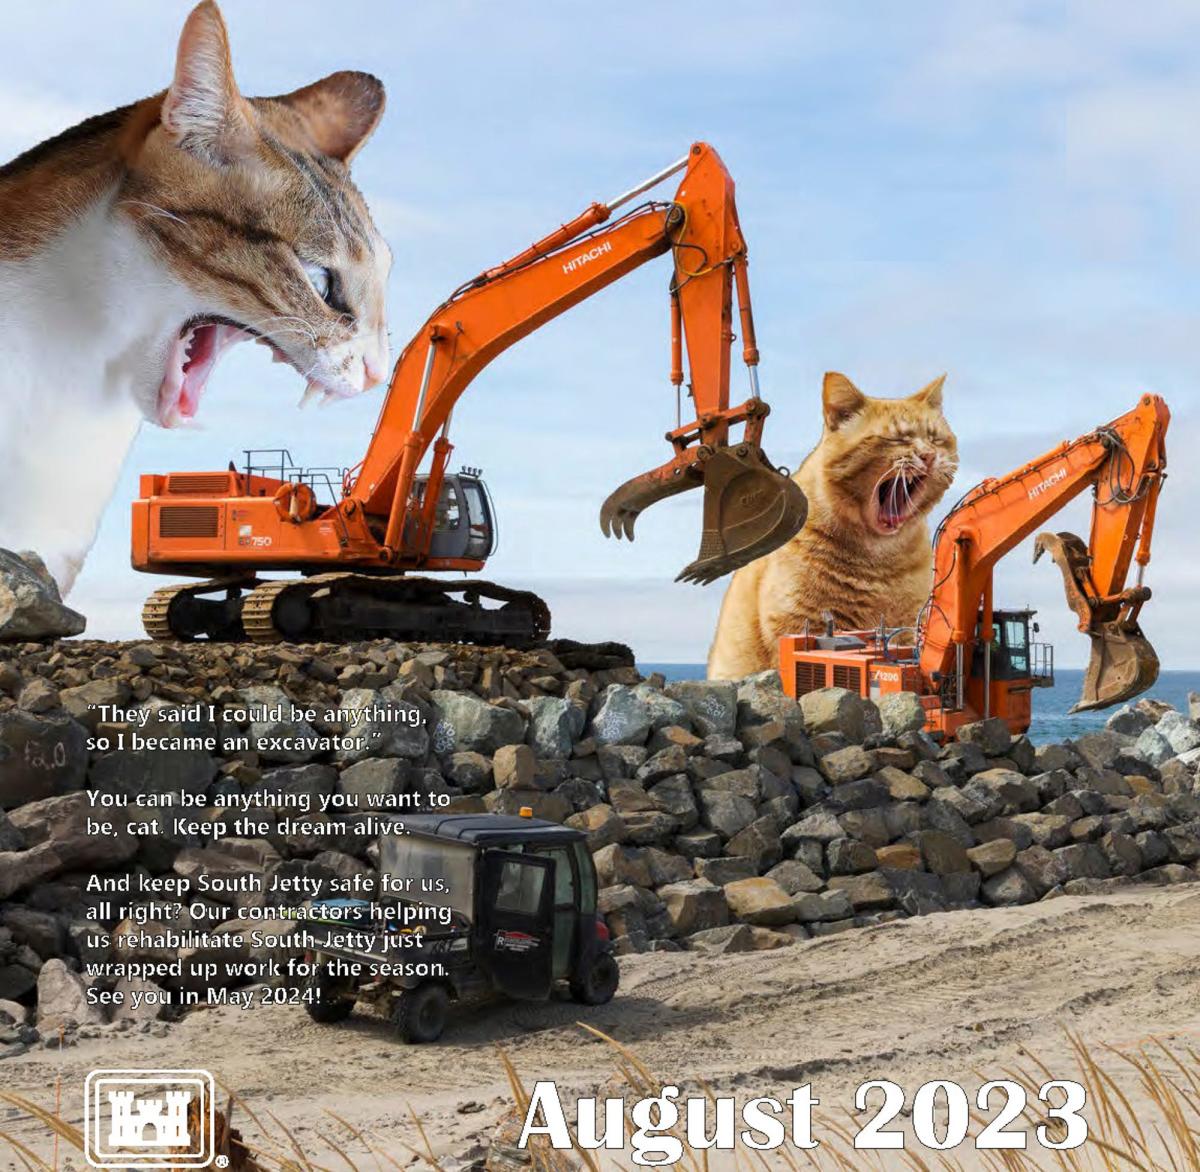 must-have-cat-calendar-for-2023-by-army-corps-of-engineers-depicts